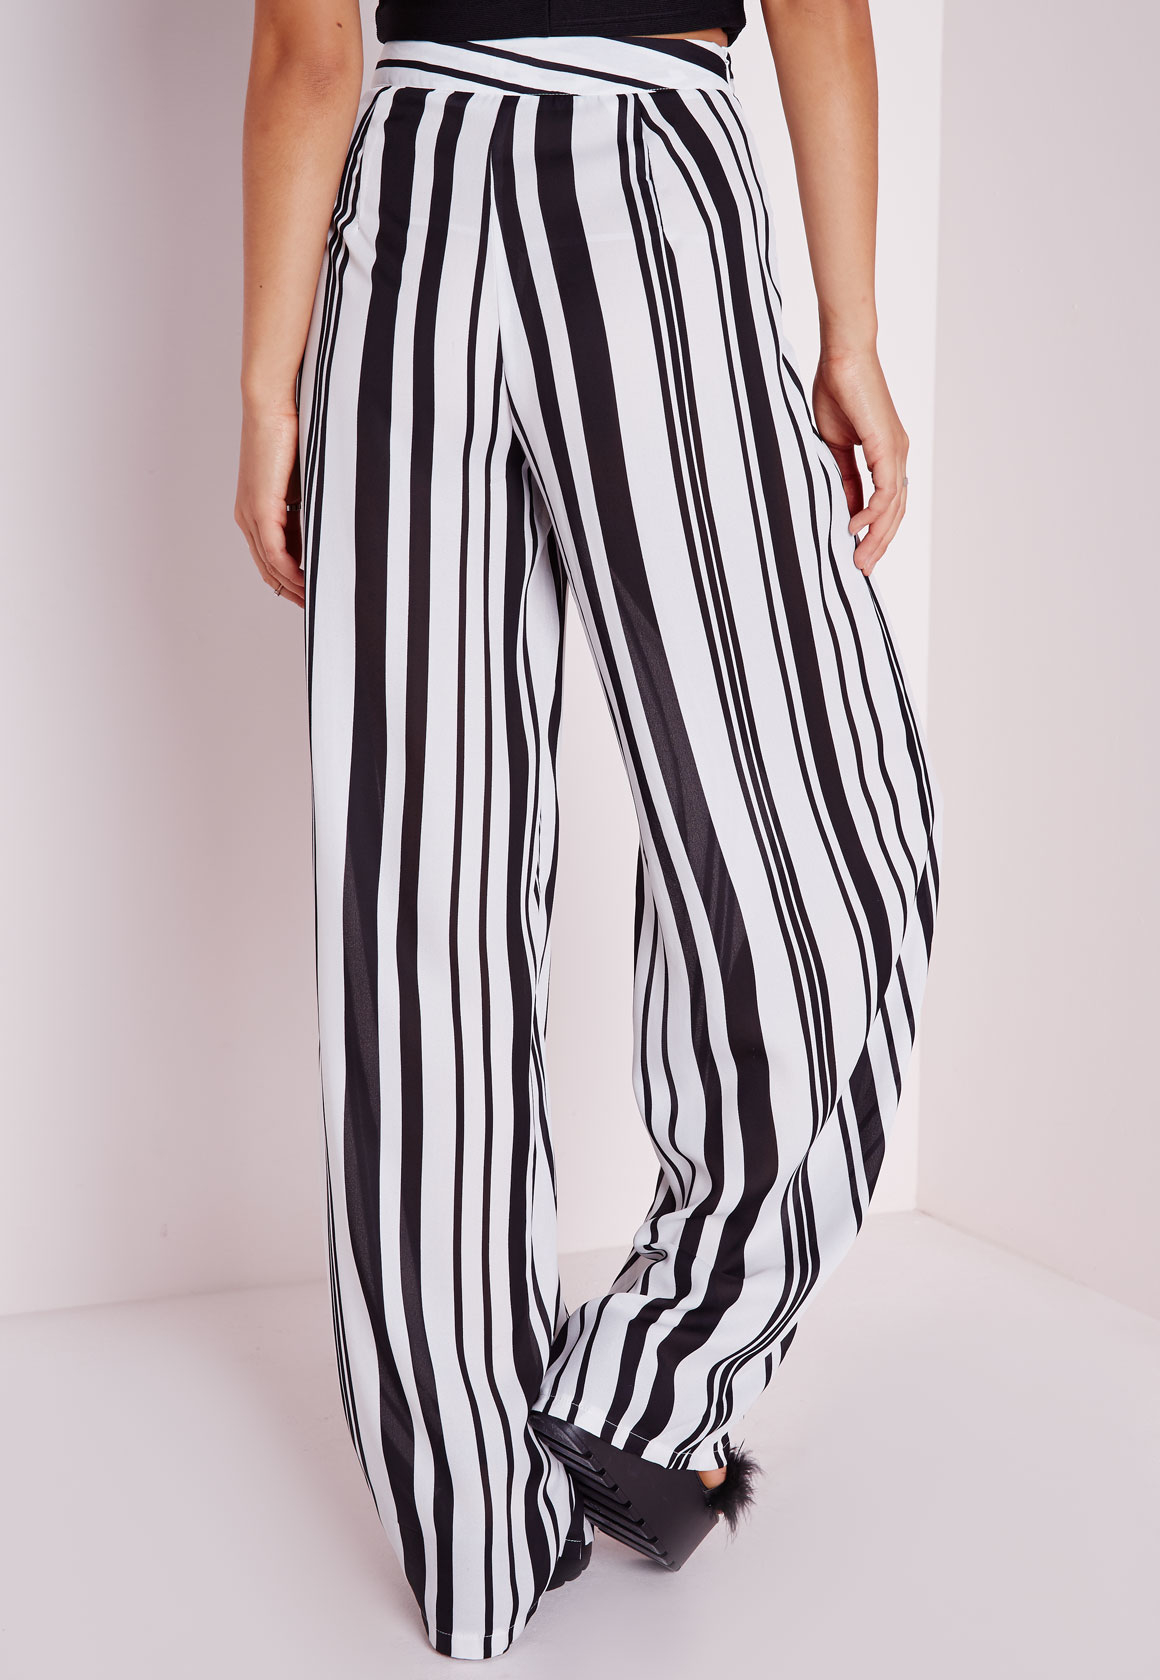 Lyst - Missguided Tall Striped Wide Leg Pants Monochrome in Black